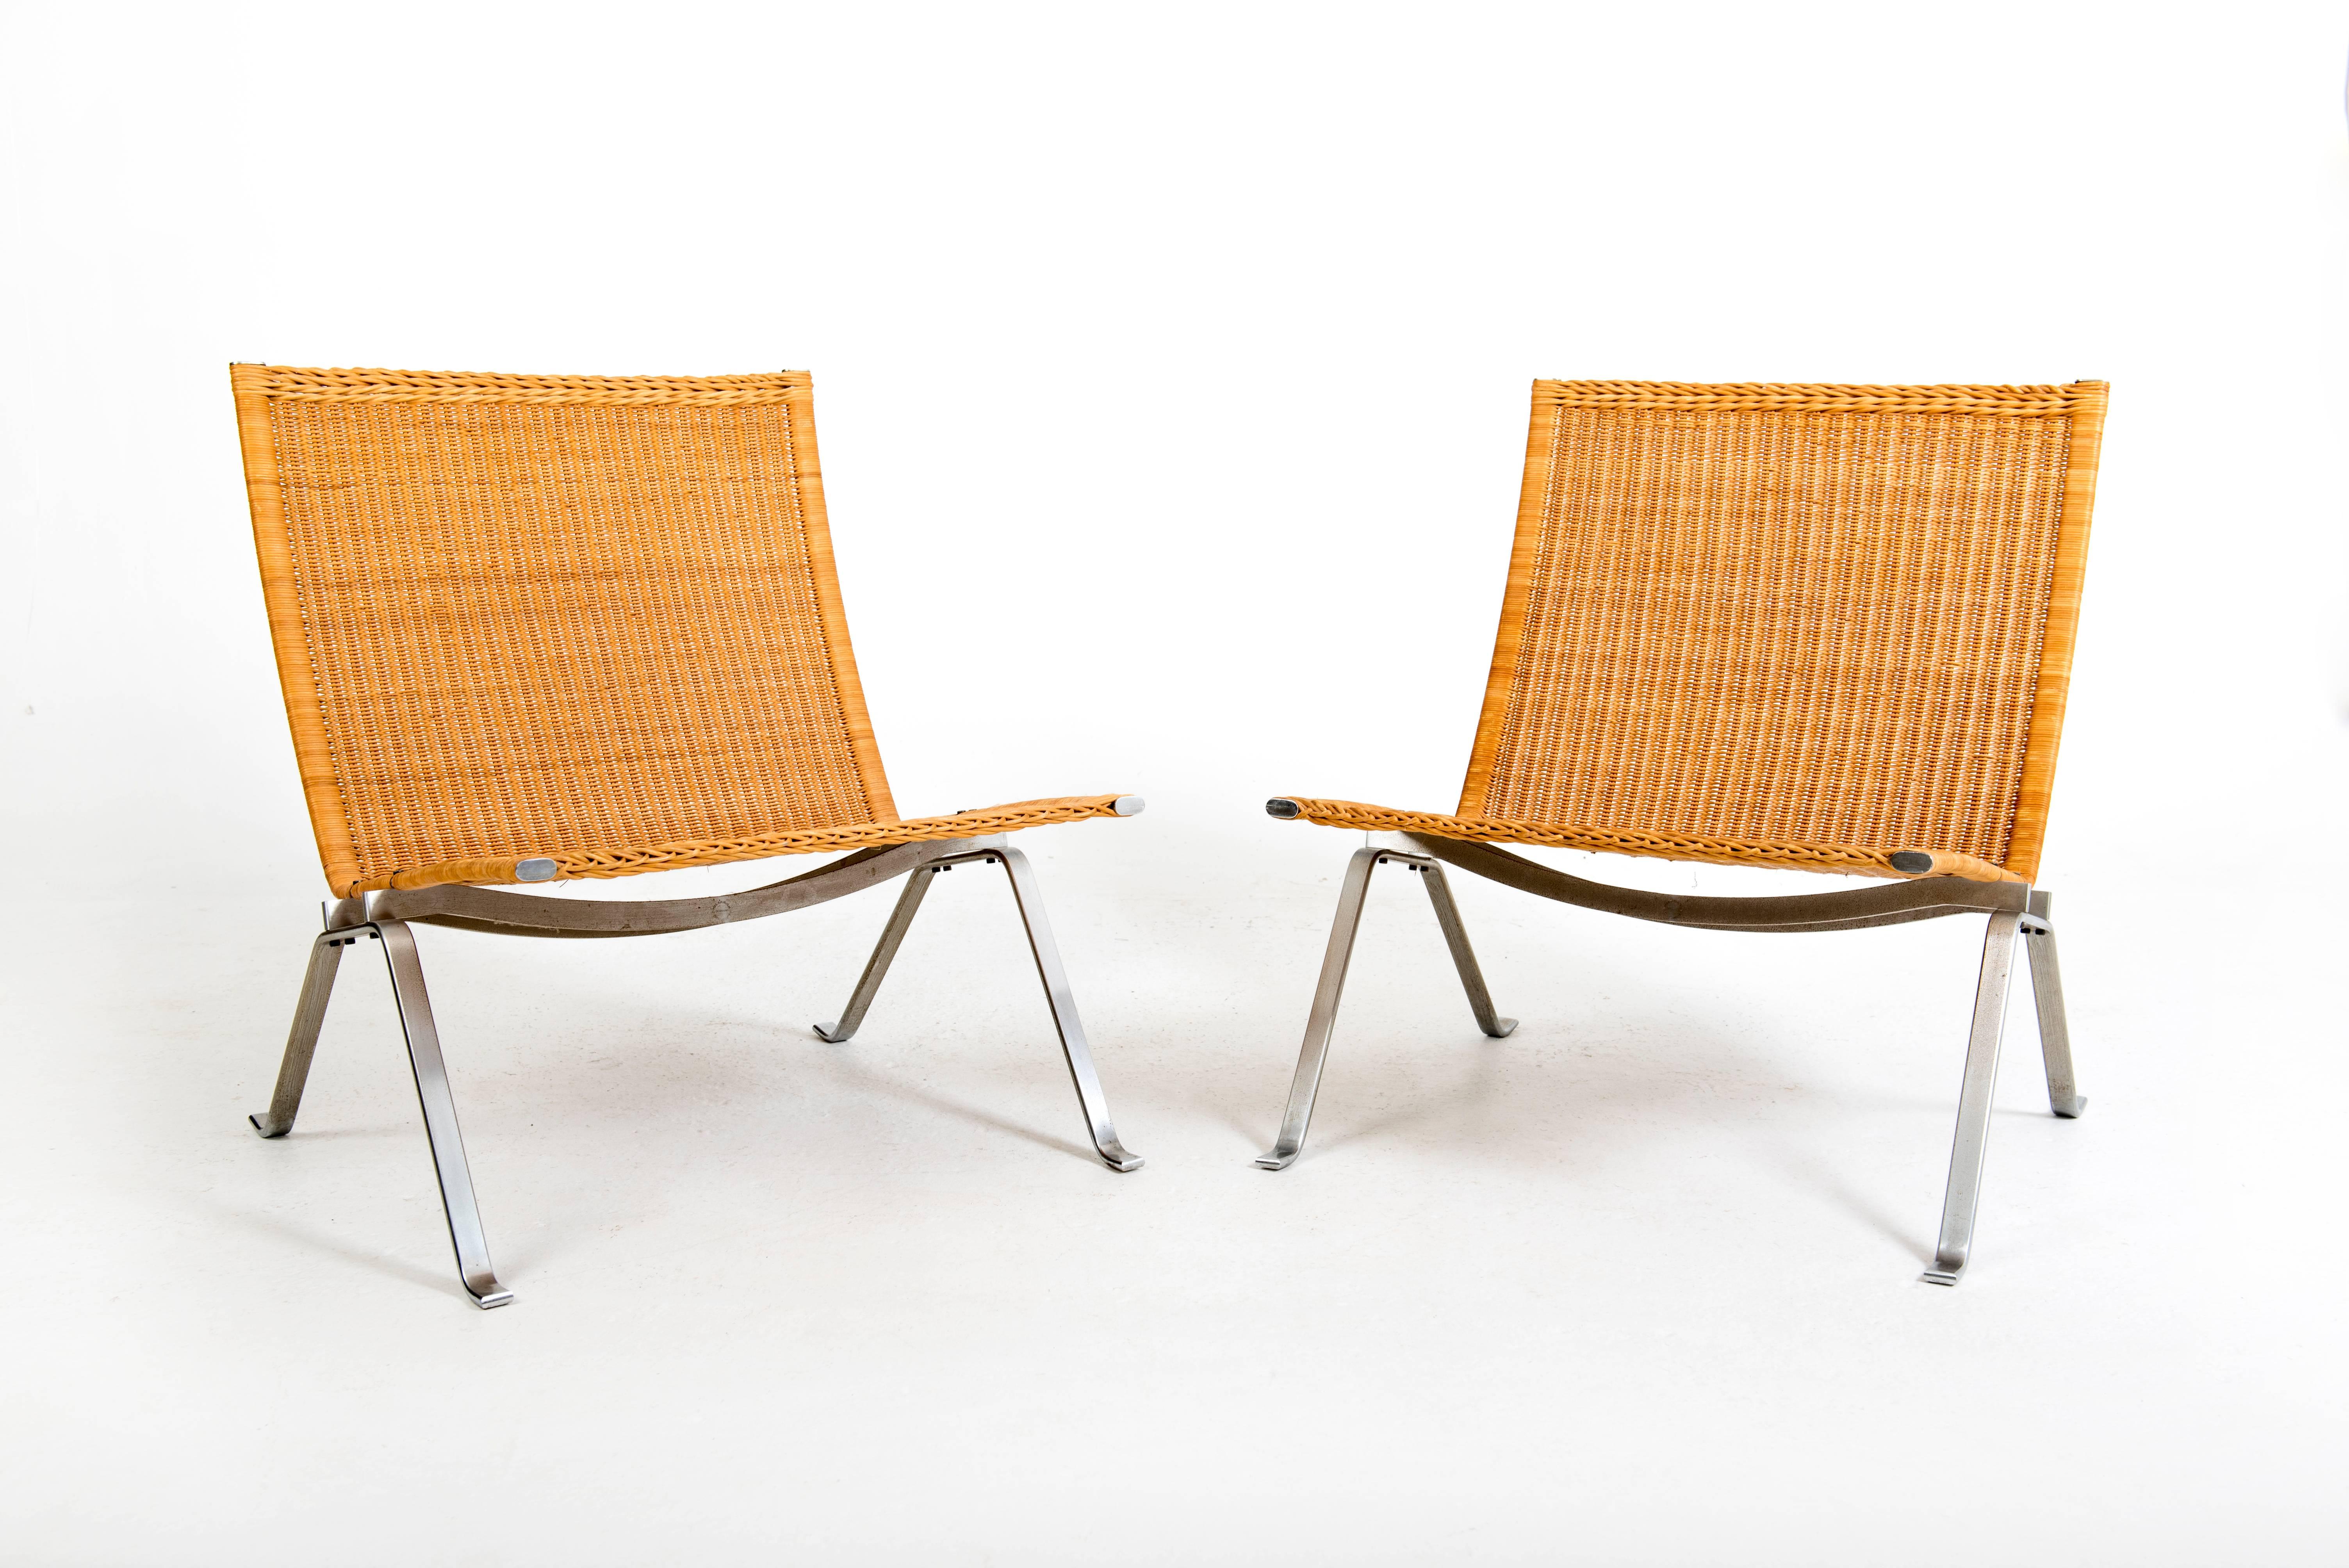 Poul Kjærholm 

PK-22.

Pair of easy chairs with steel frame, seat and back with cane. 

Made and stamped by Fritz Hansen.